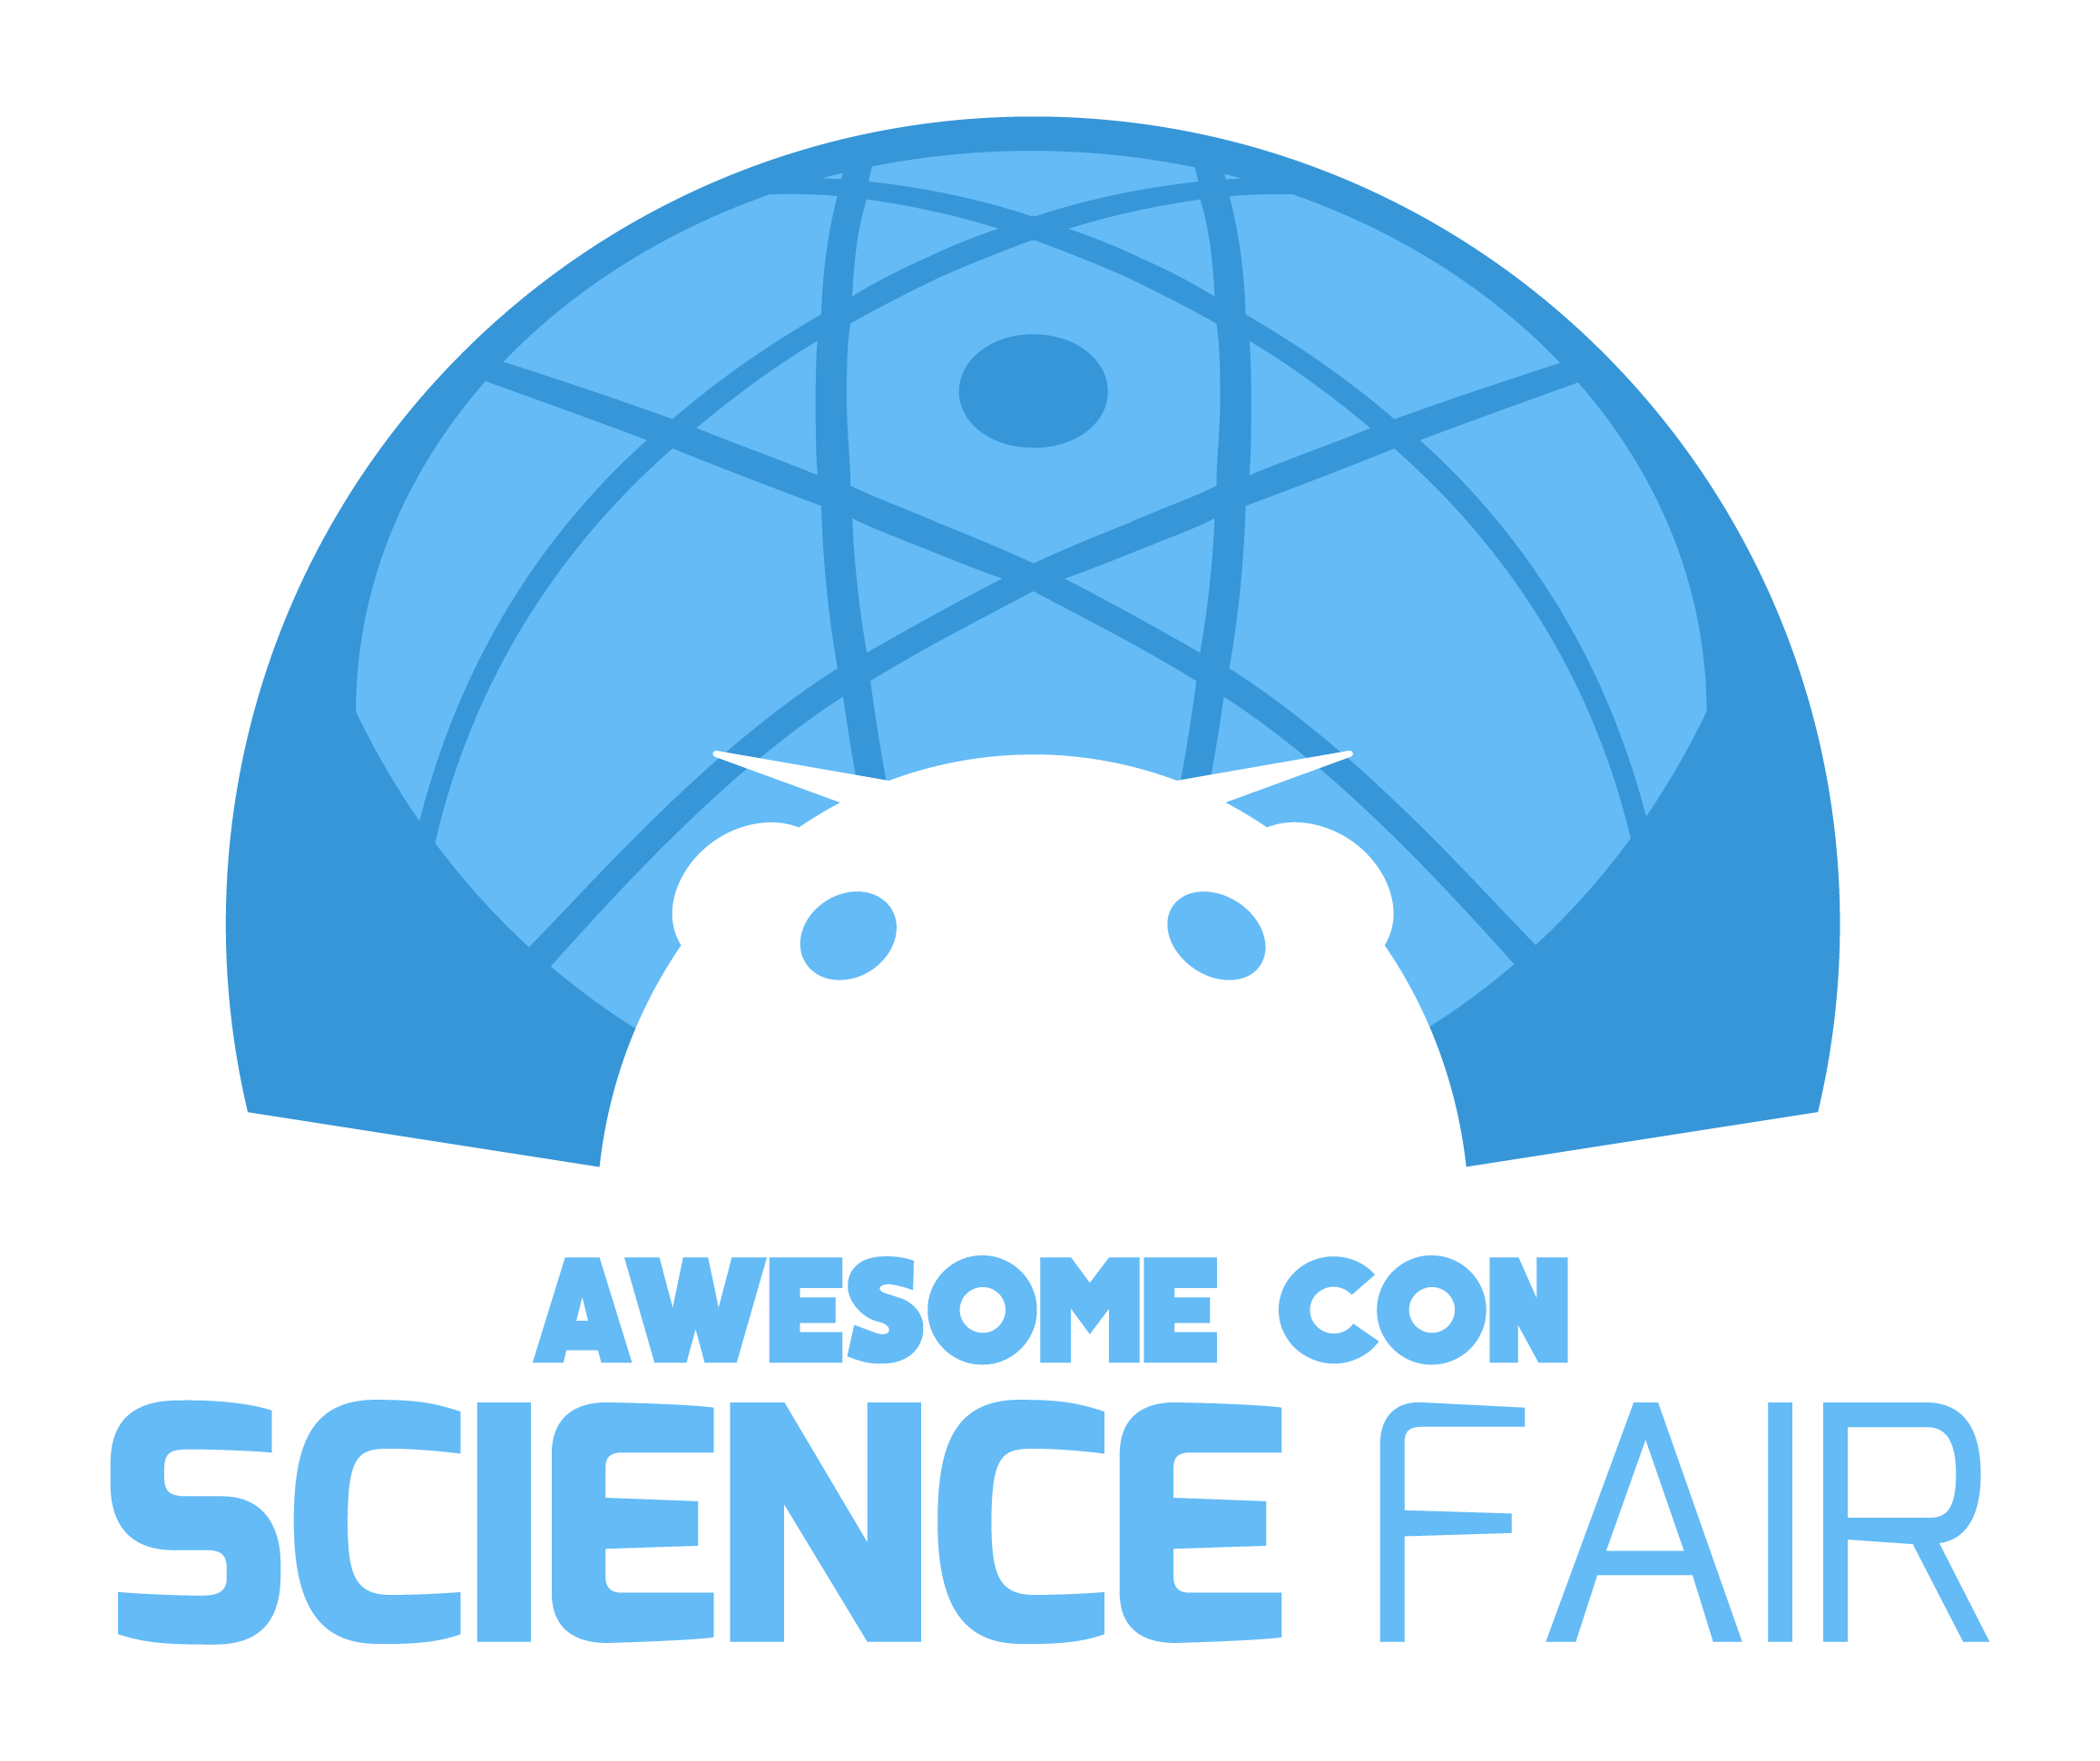 AC Science Fair for light backgrounds